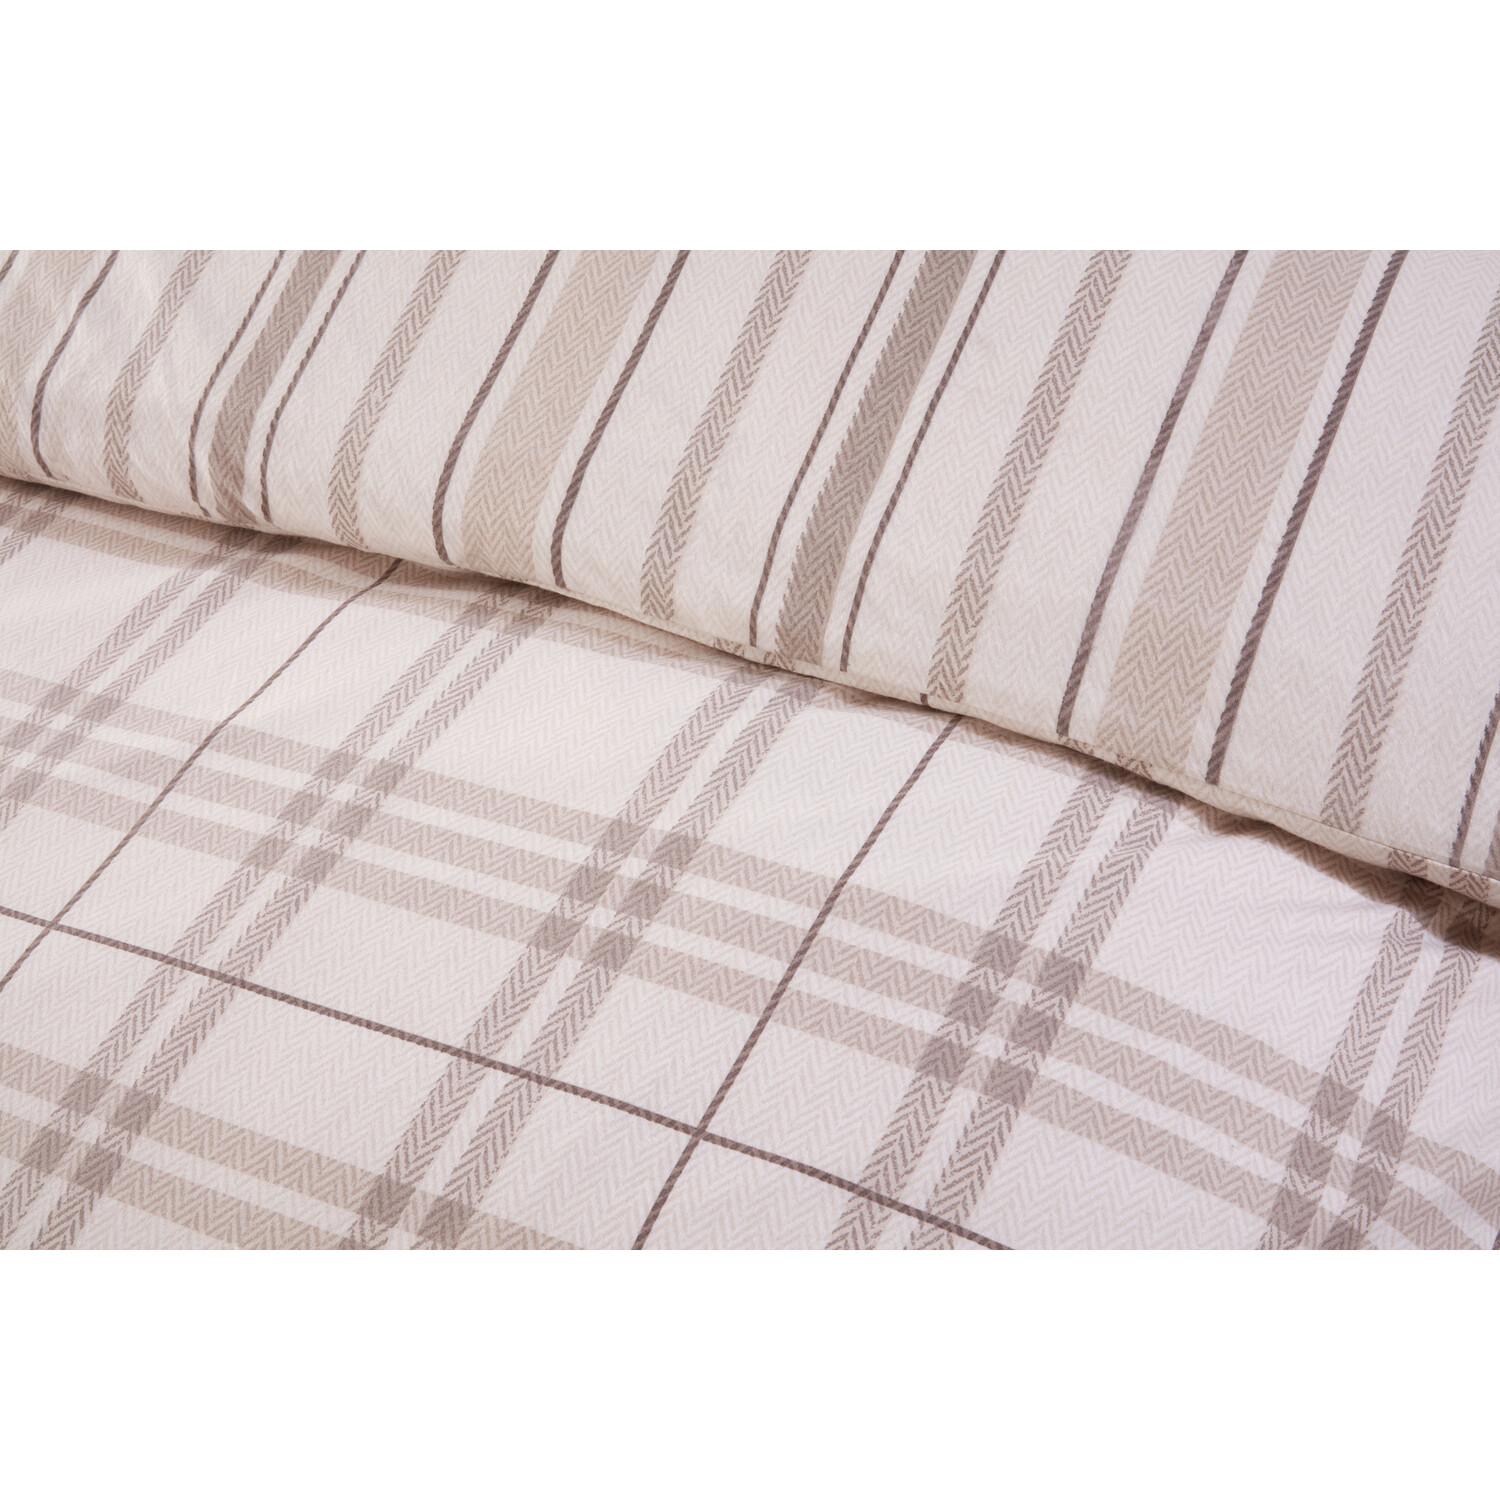 Fall Autumn Single Brown Check Duvet Cover and Pillowcase Set Image 5